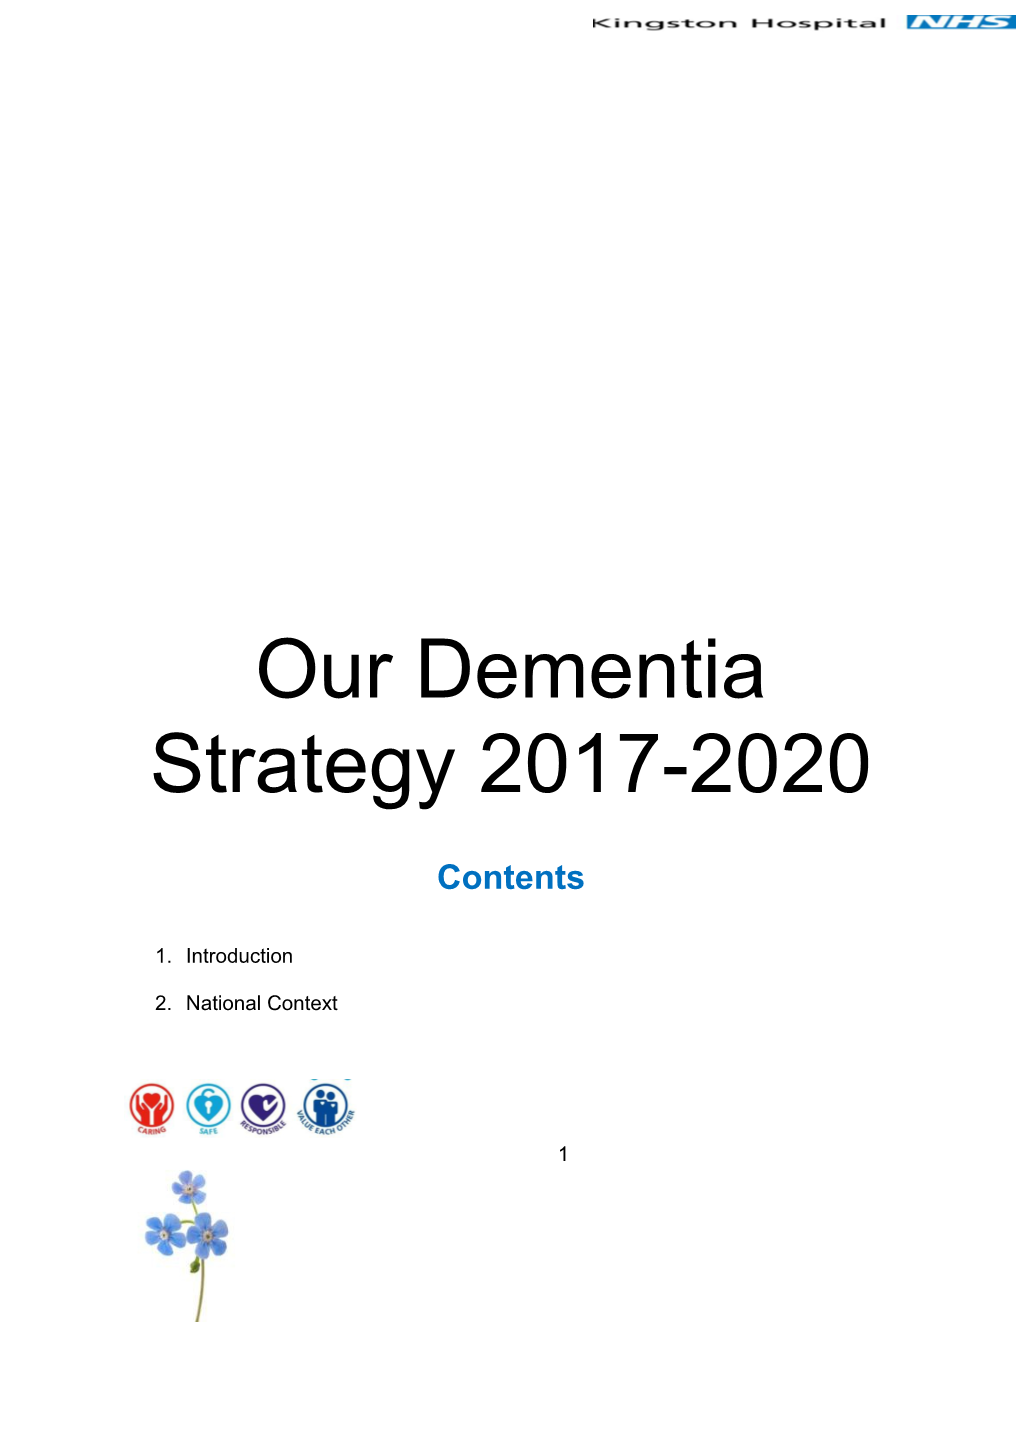 Our Dementia Strategy 2017-2020